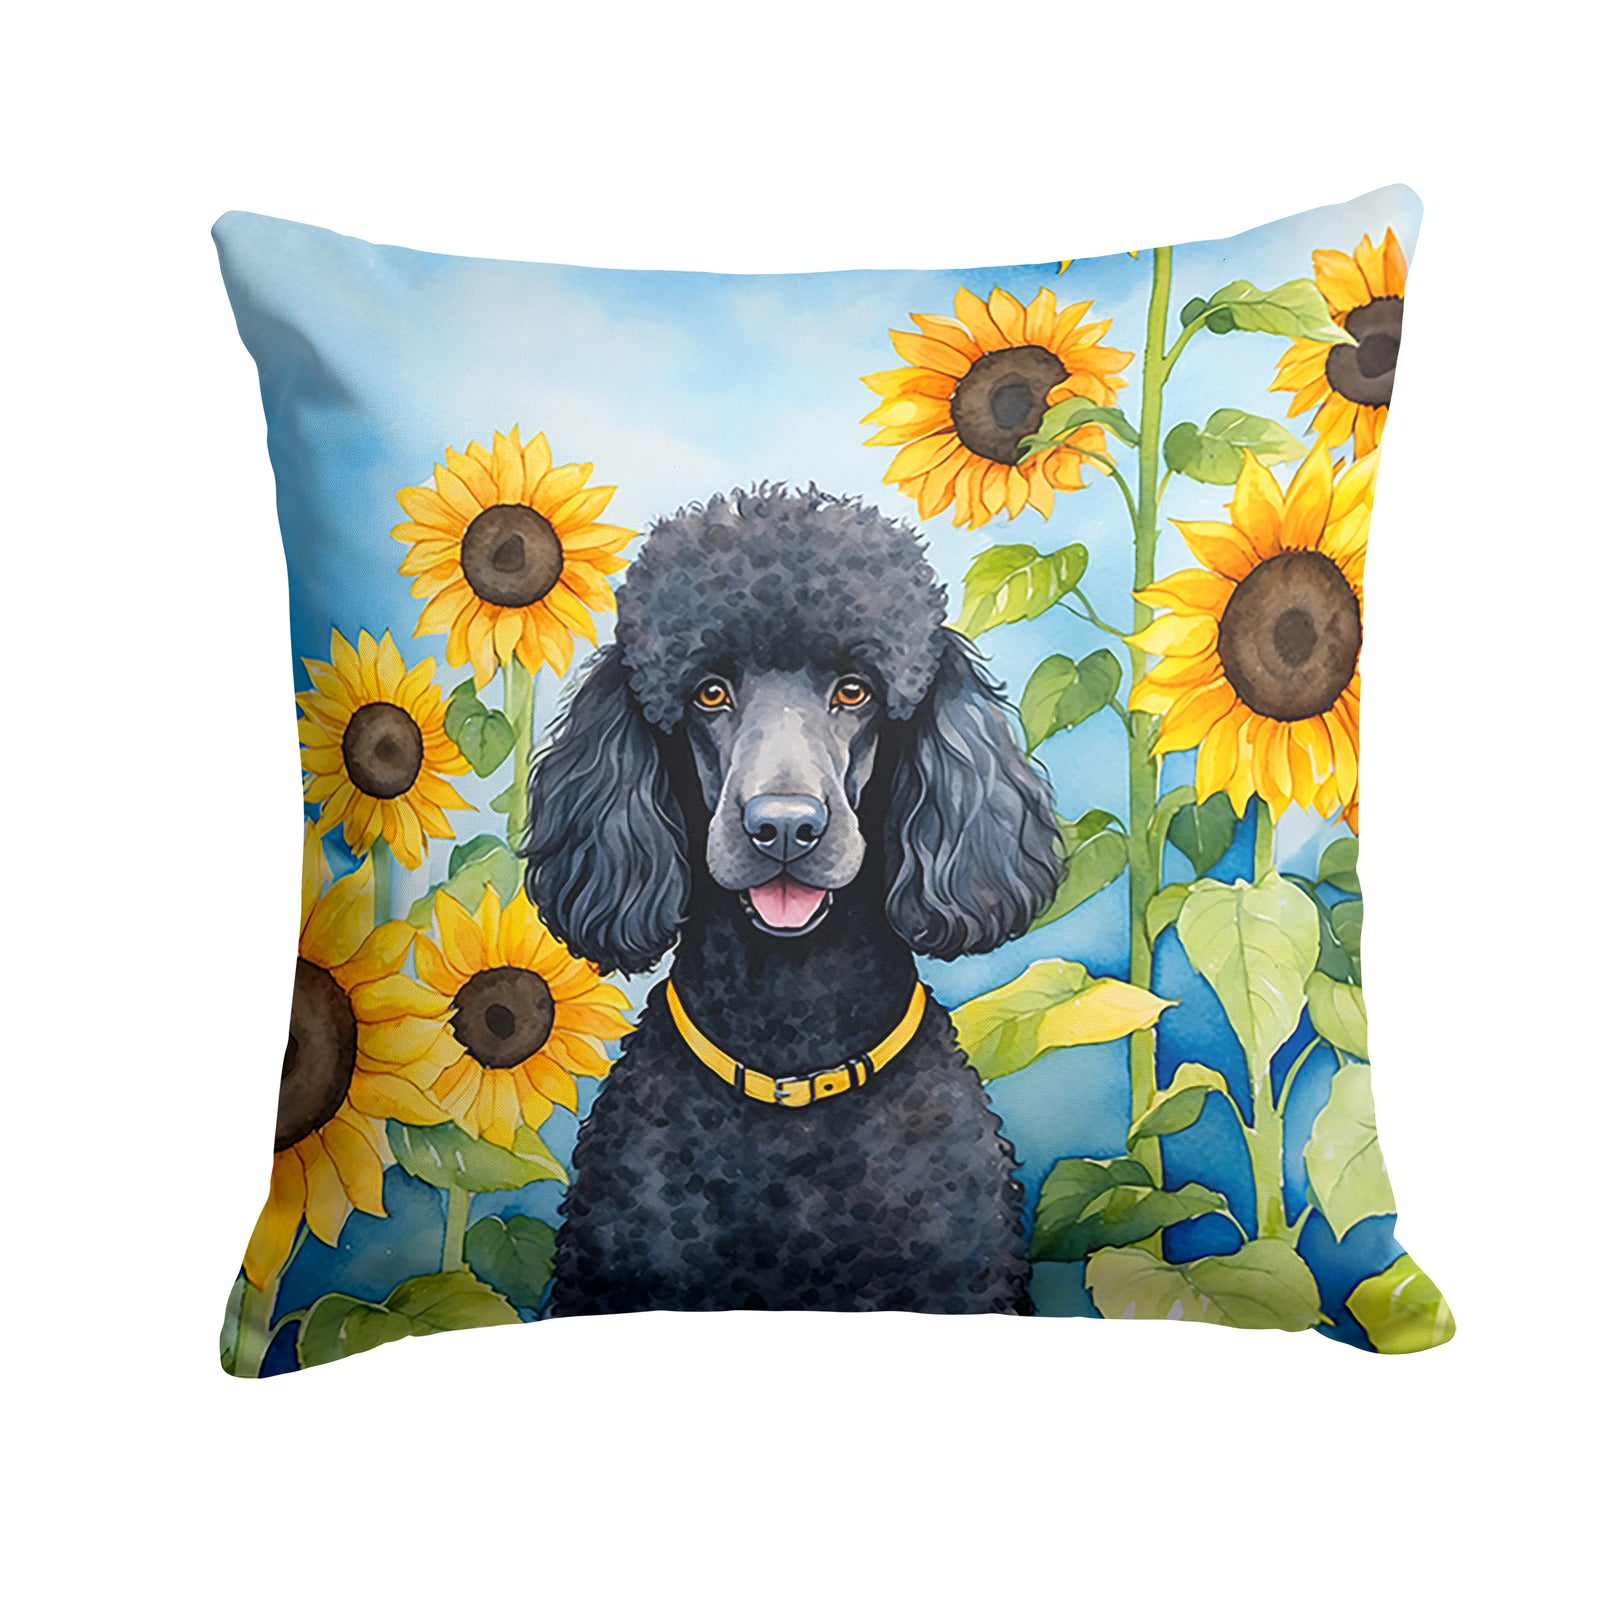 Buy this Black Poodle in Sunflowers Throw Pillow